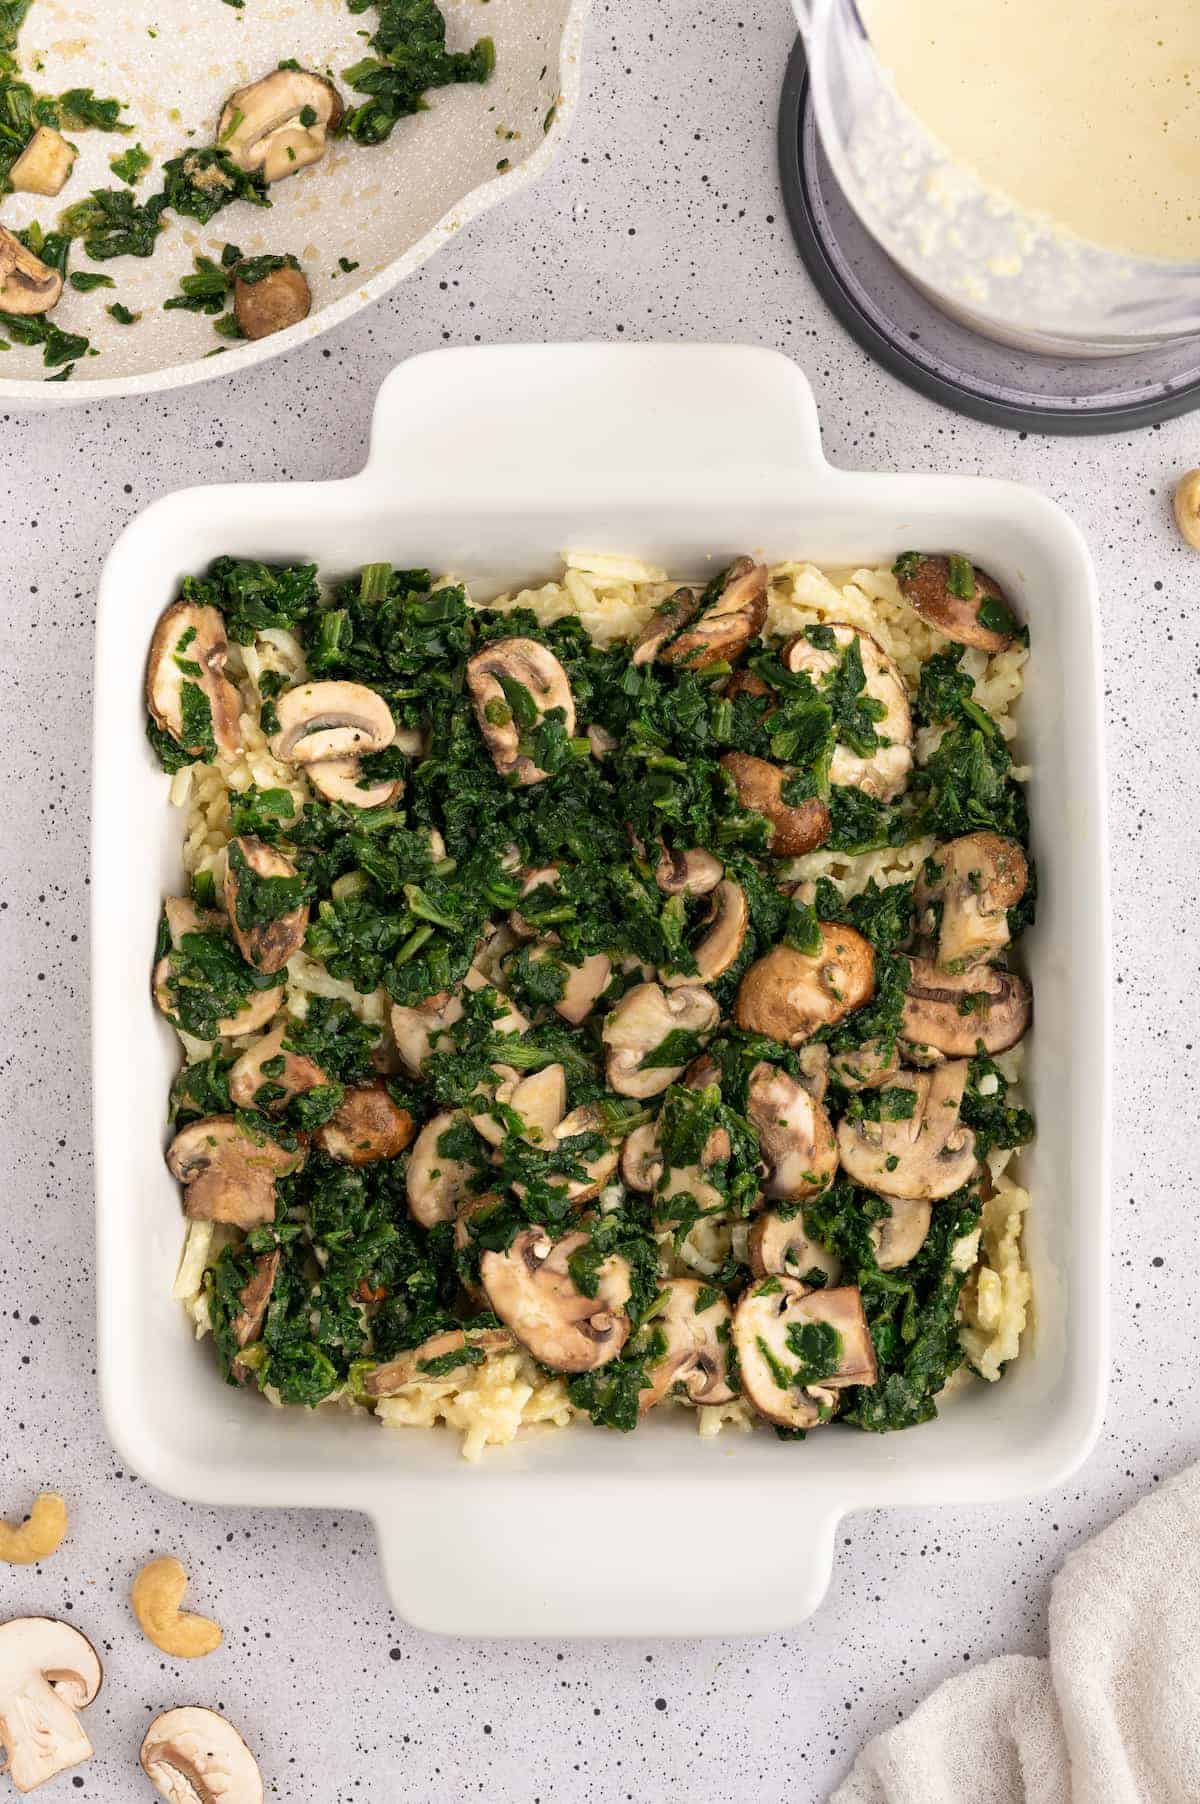 A spinach and mushroom mixture in a casserole dish.